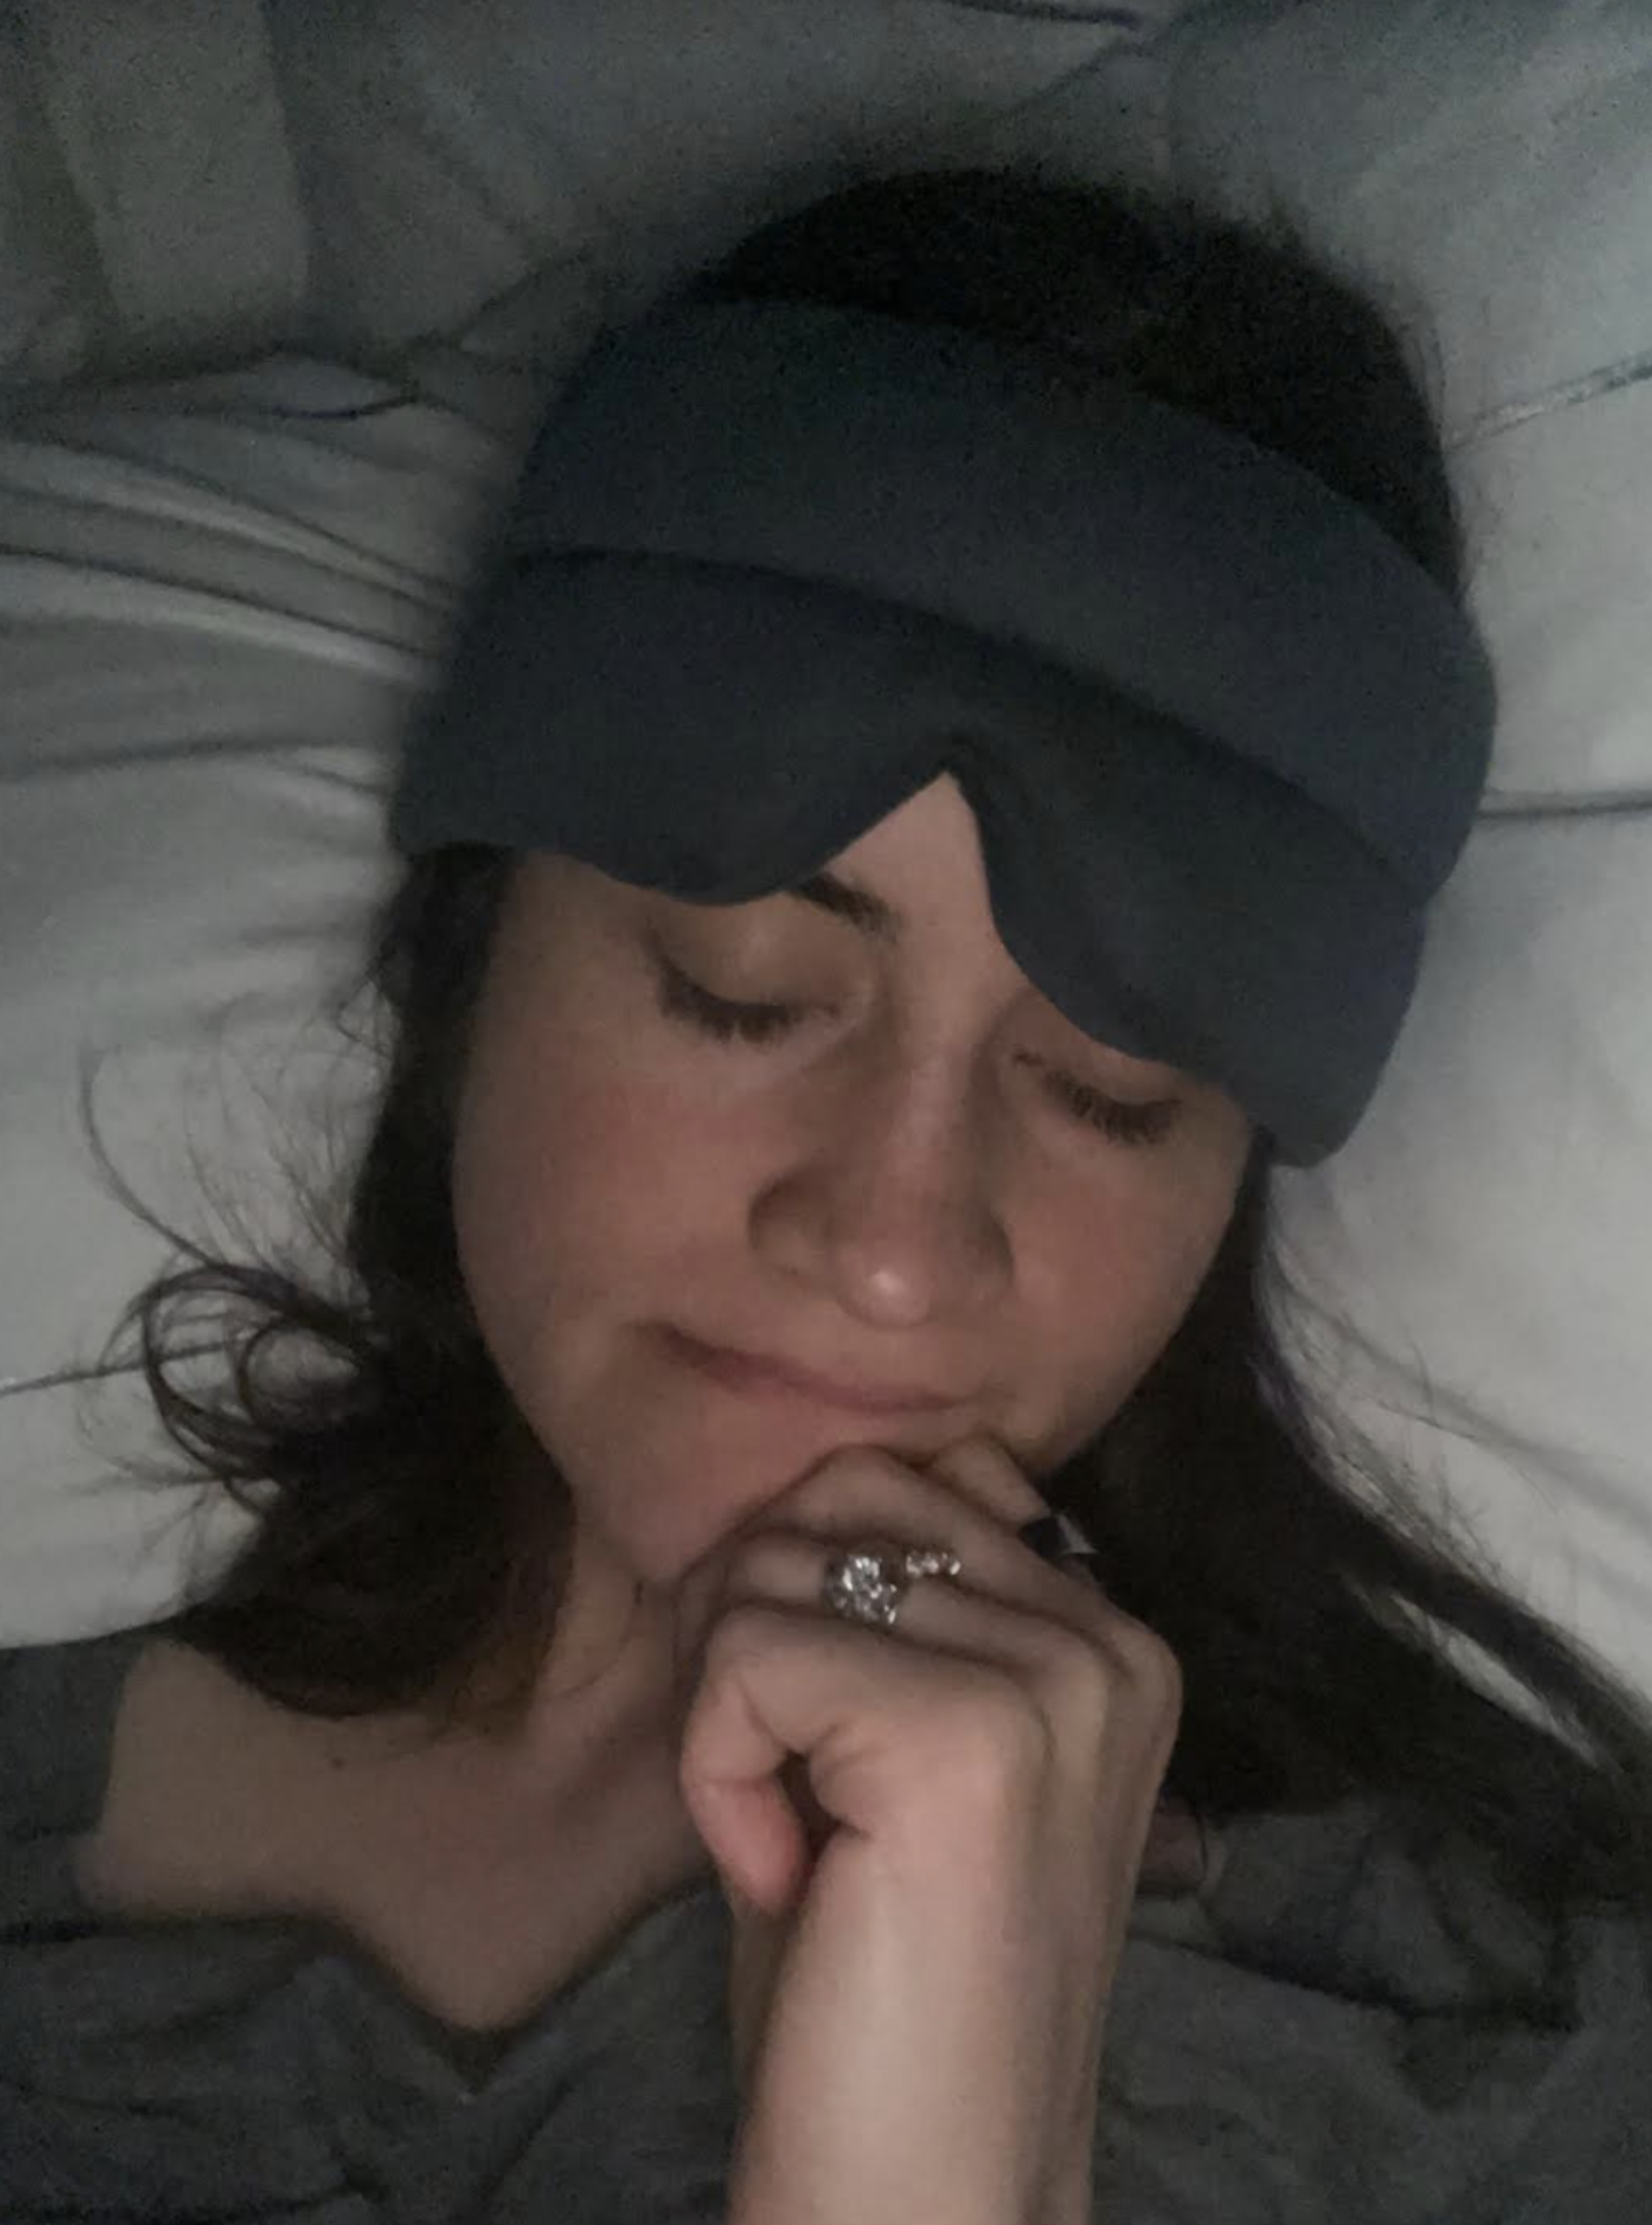 A woman wearing a sleep mask is lying in bed with her eyes closed, propped up on one hand with a thoughtful expression